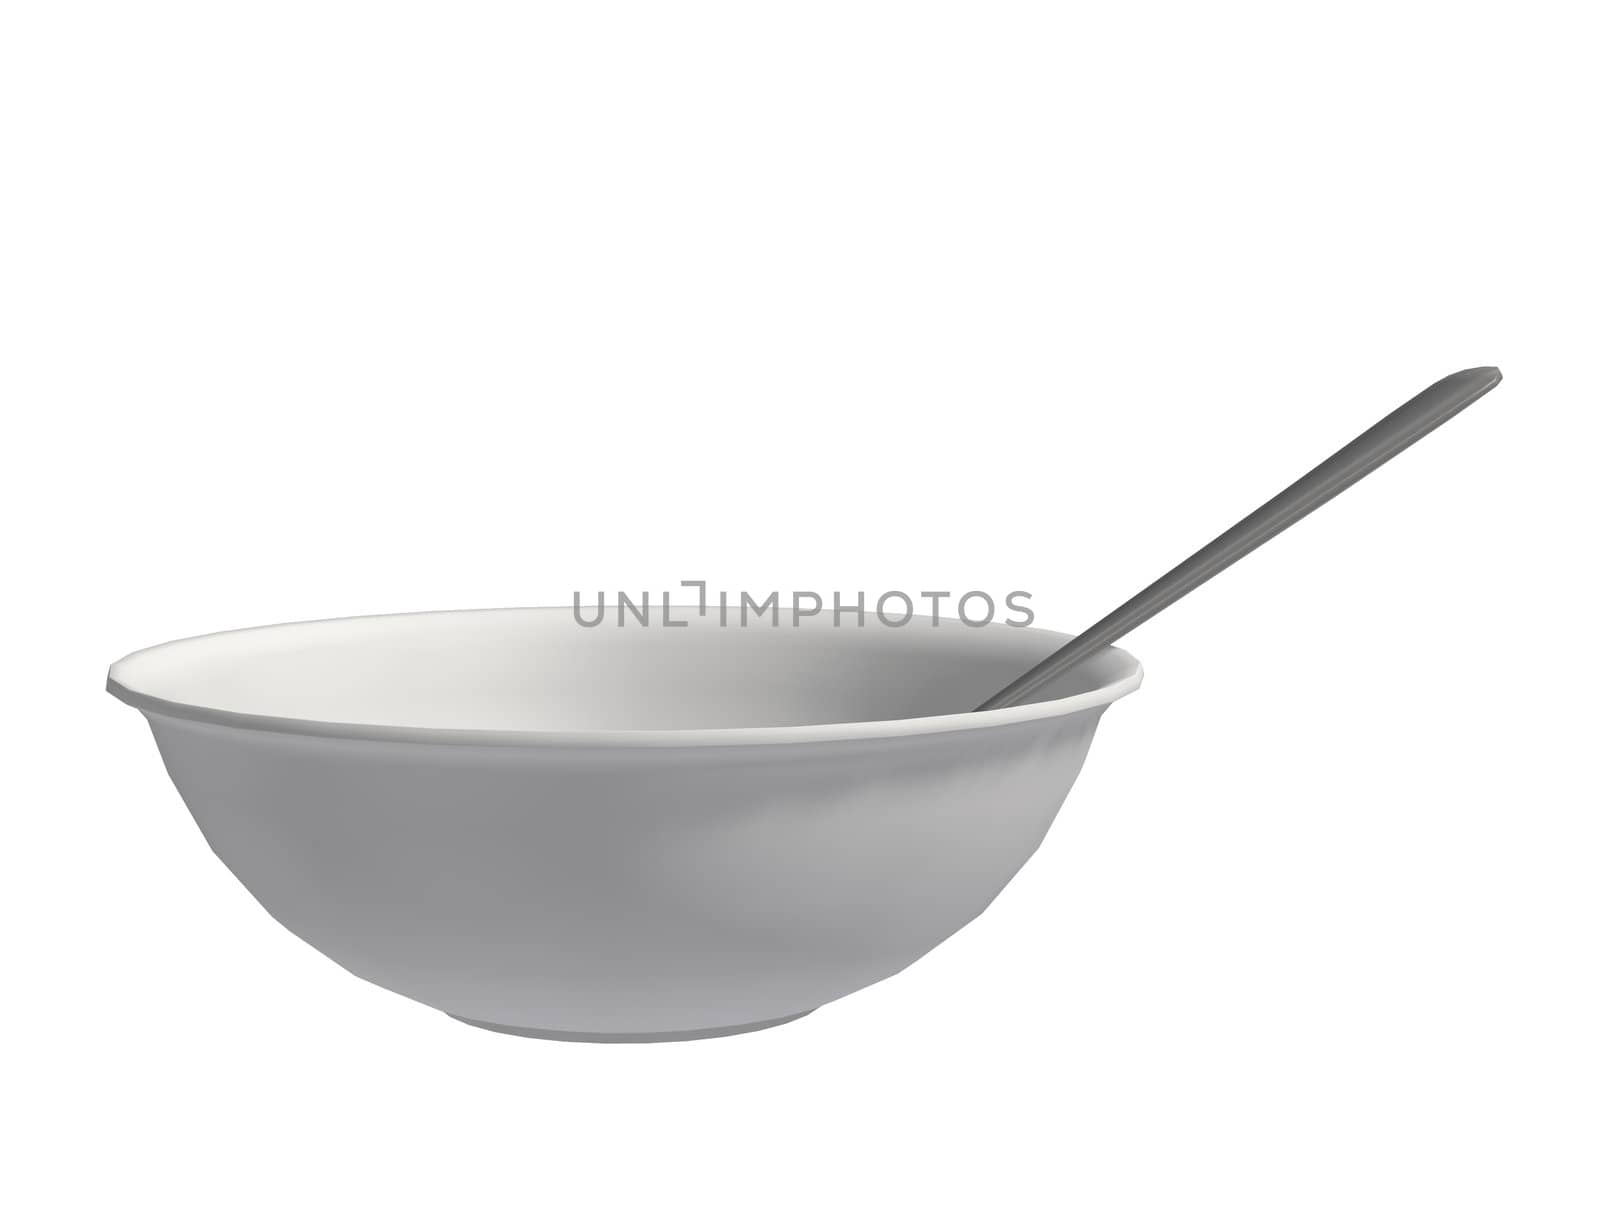 Bowl With A Spoon by kathygold